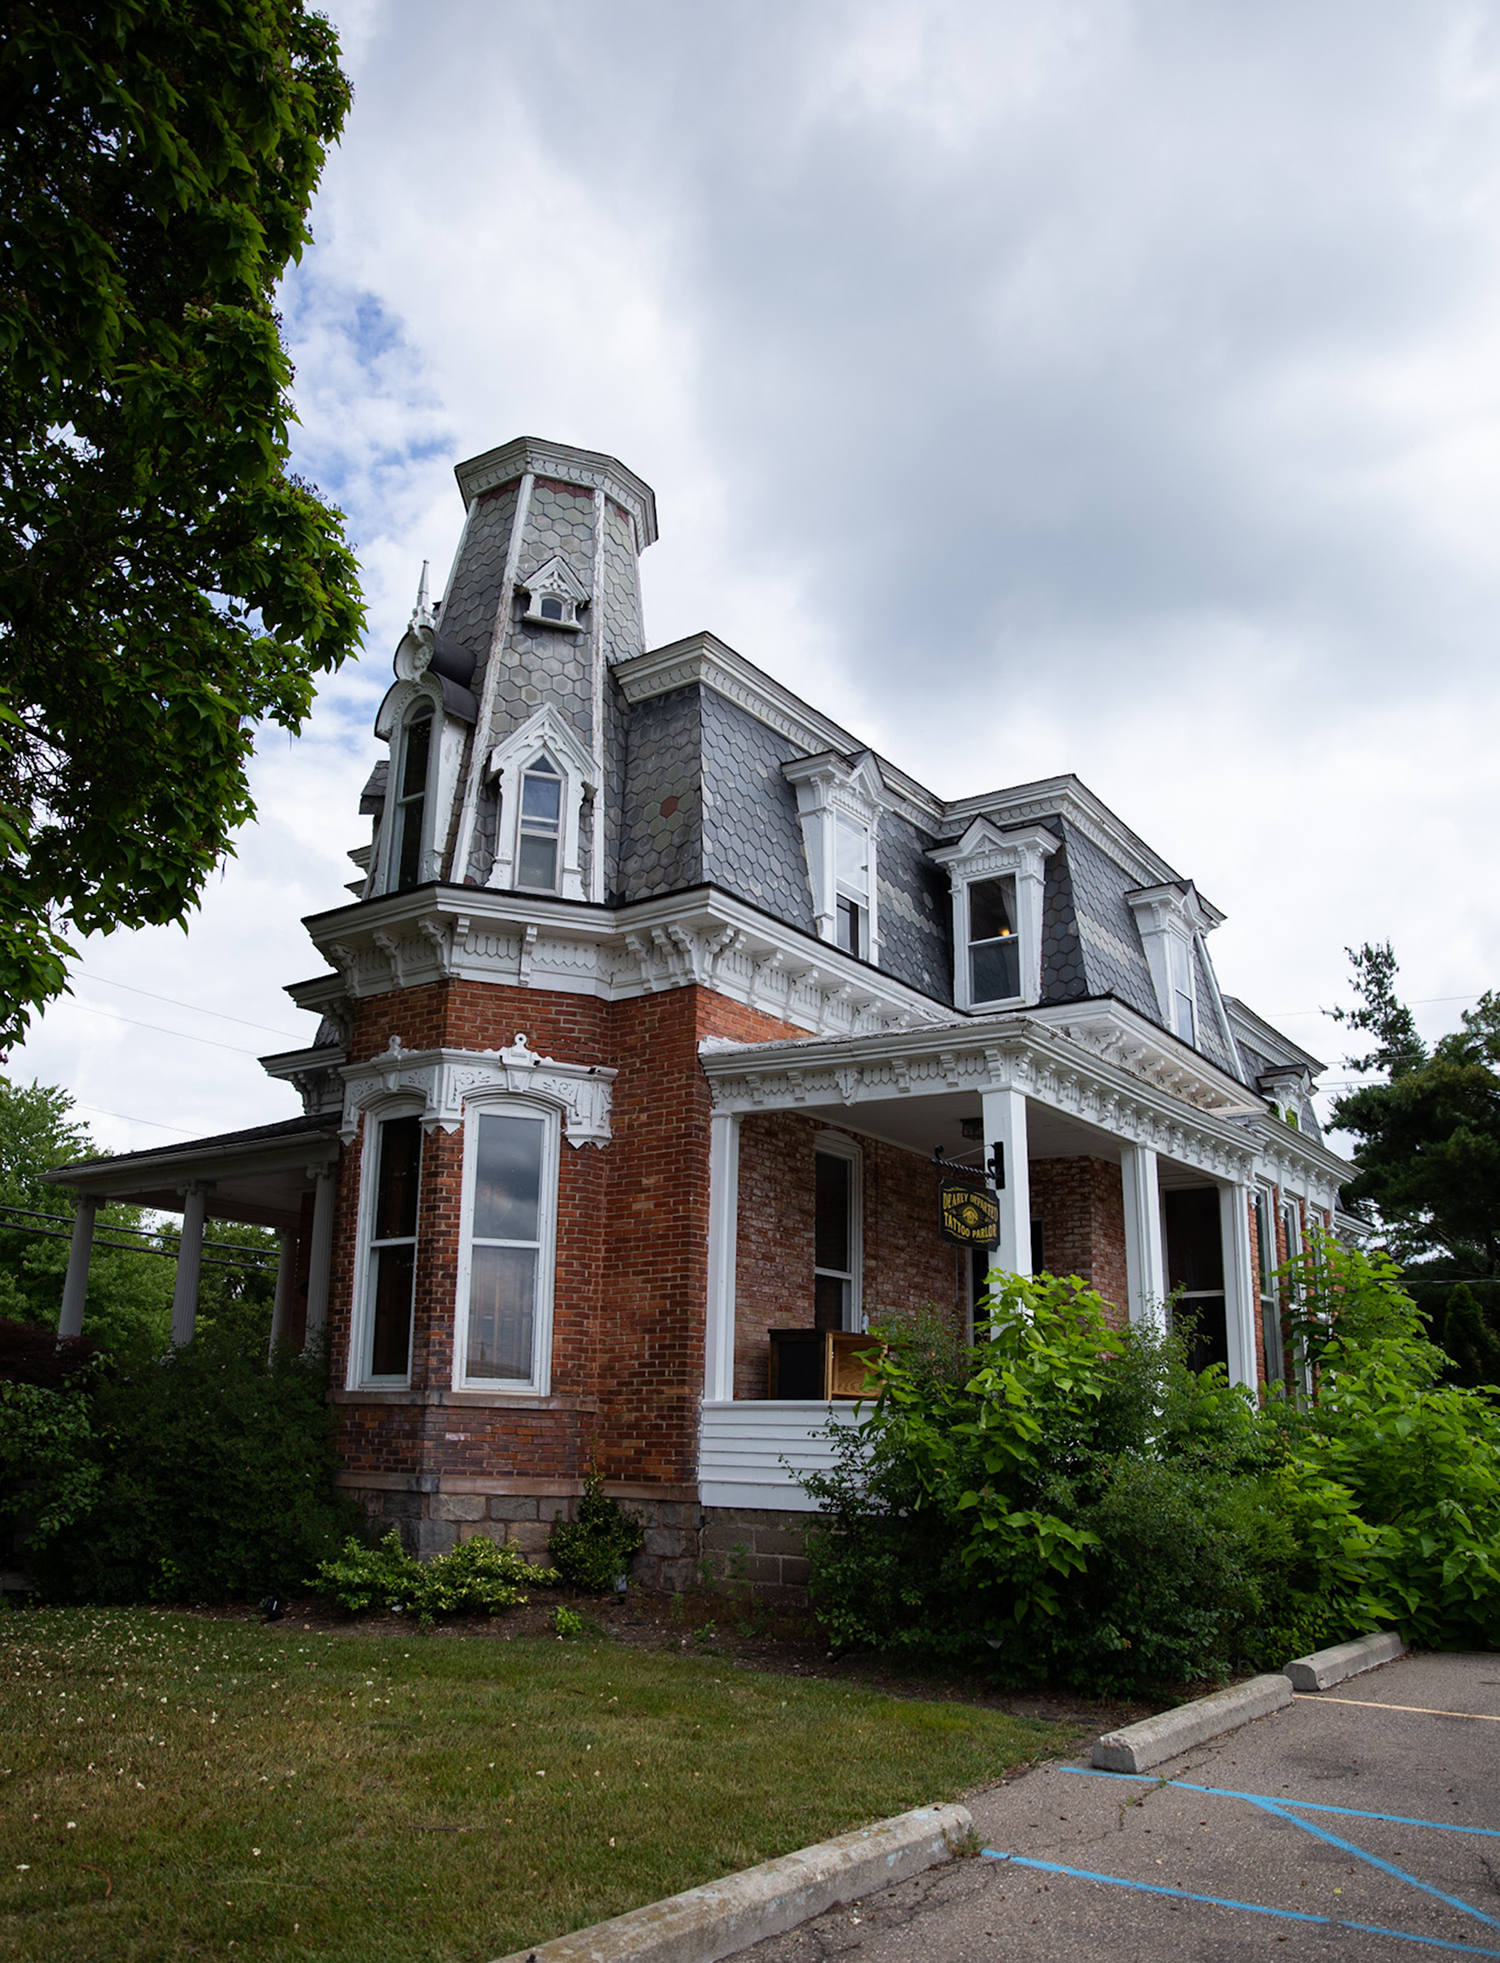 Owner Mark Clifford The 1881 building houses the private studio Dearly Departed Tattoos and Fine Art in Milford, MI